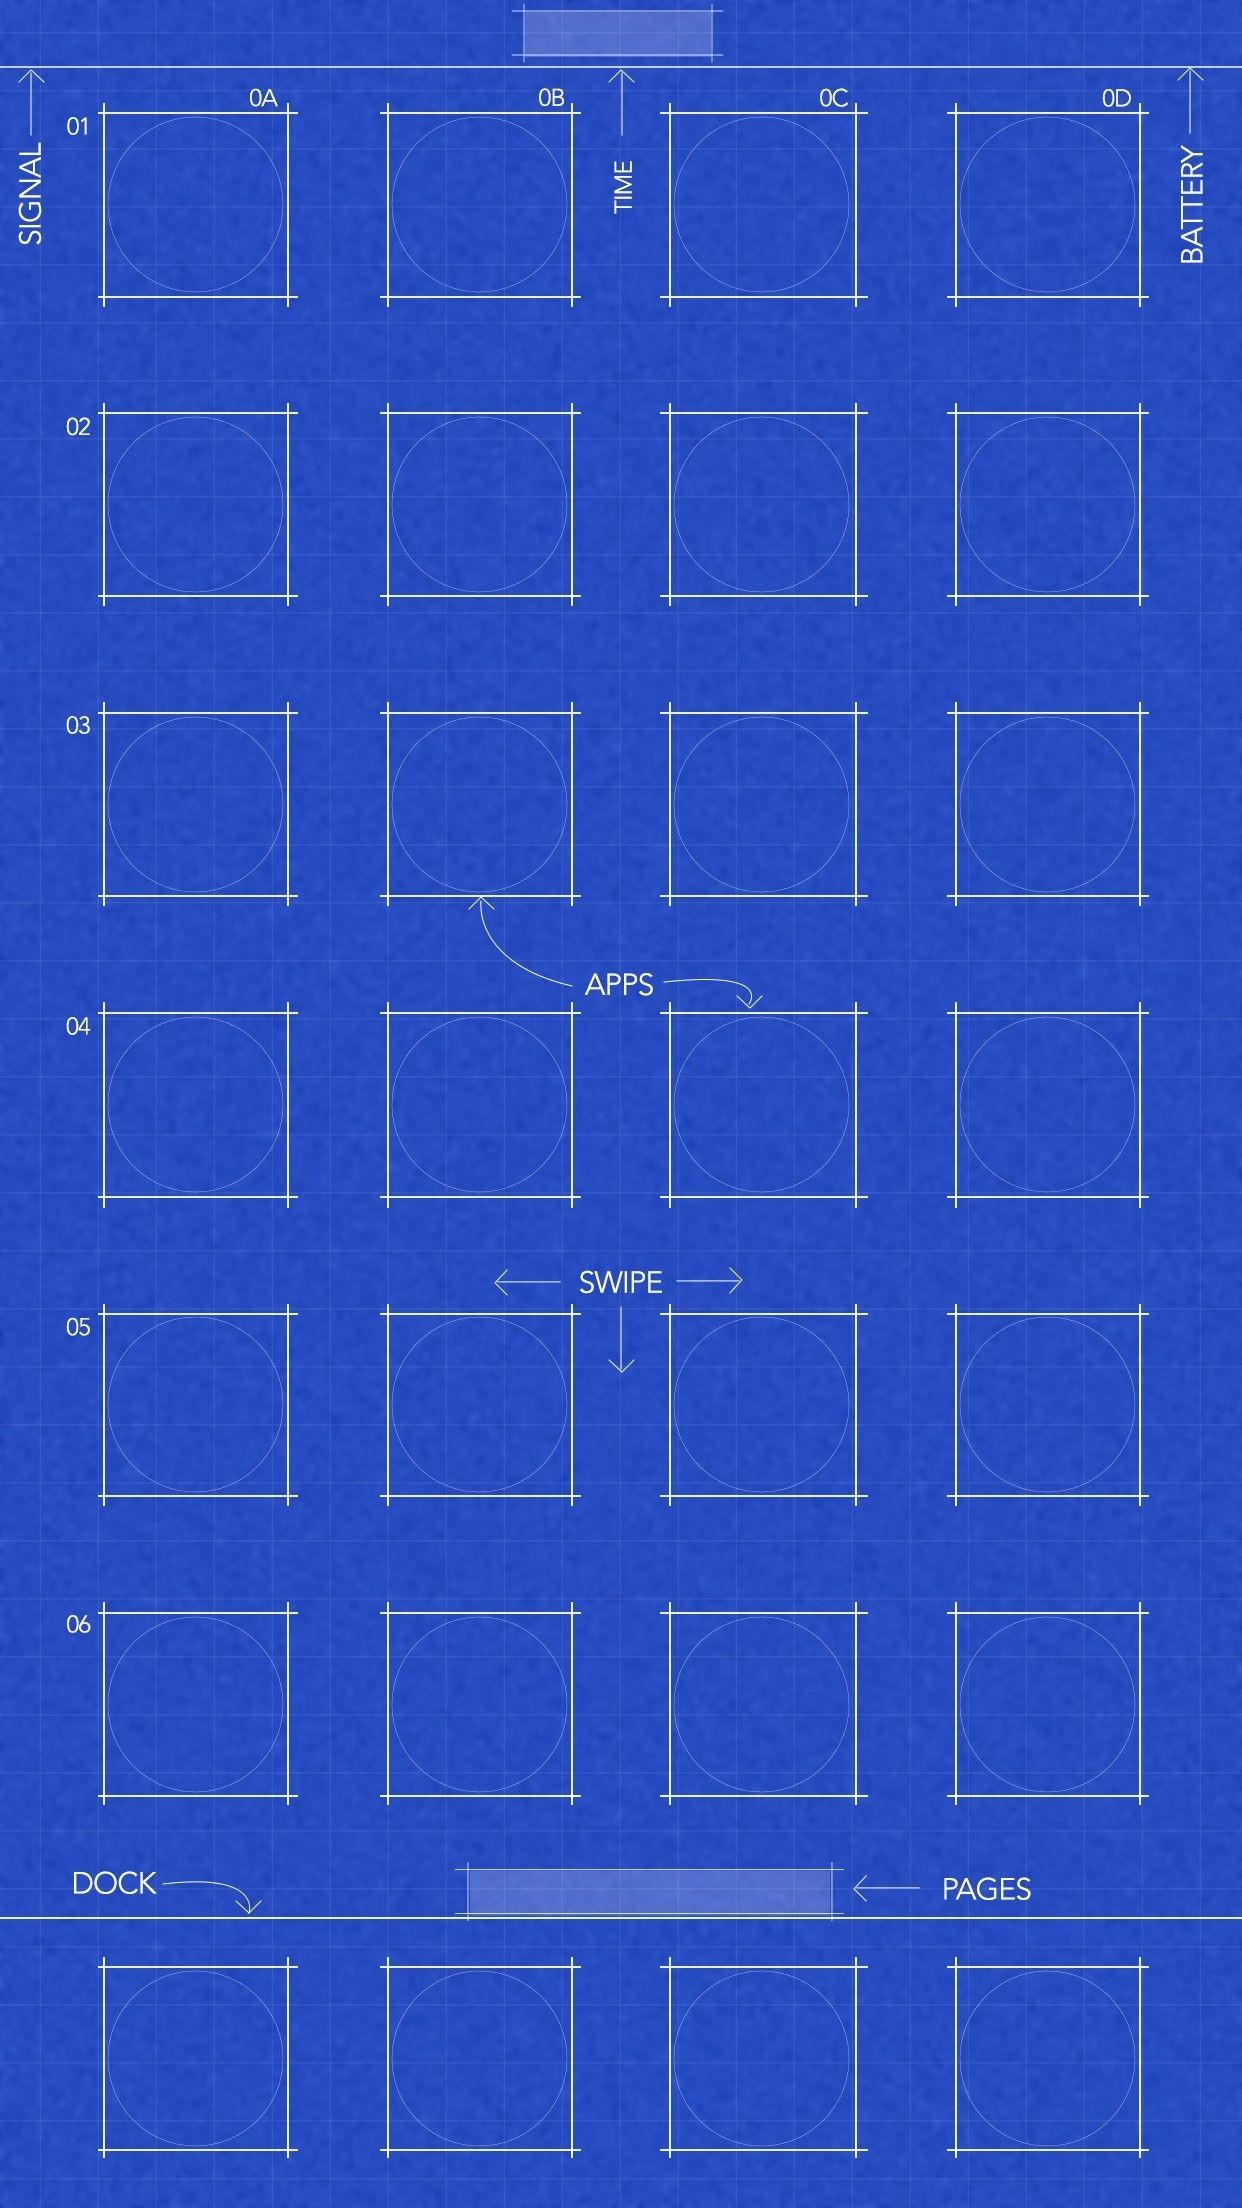 1242x2208 Ipad 2 Blueprint Wallpaper Marques Brownlee On Twitter This IPhone So  Satisfying